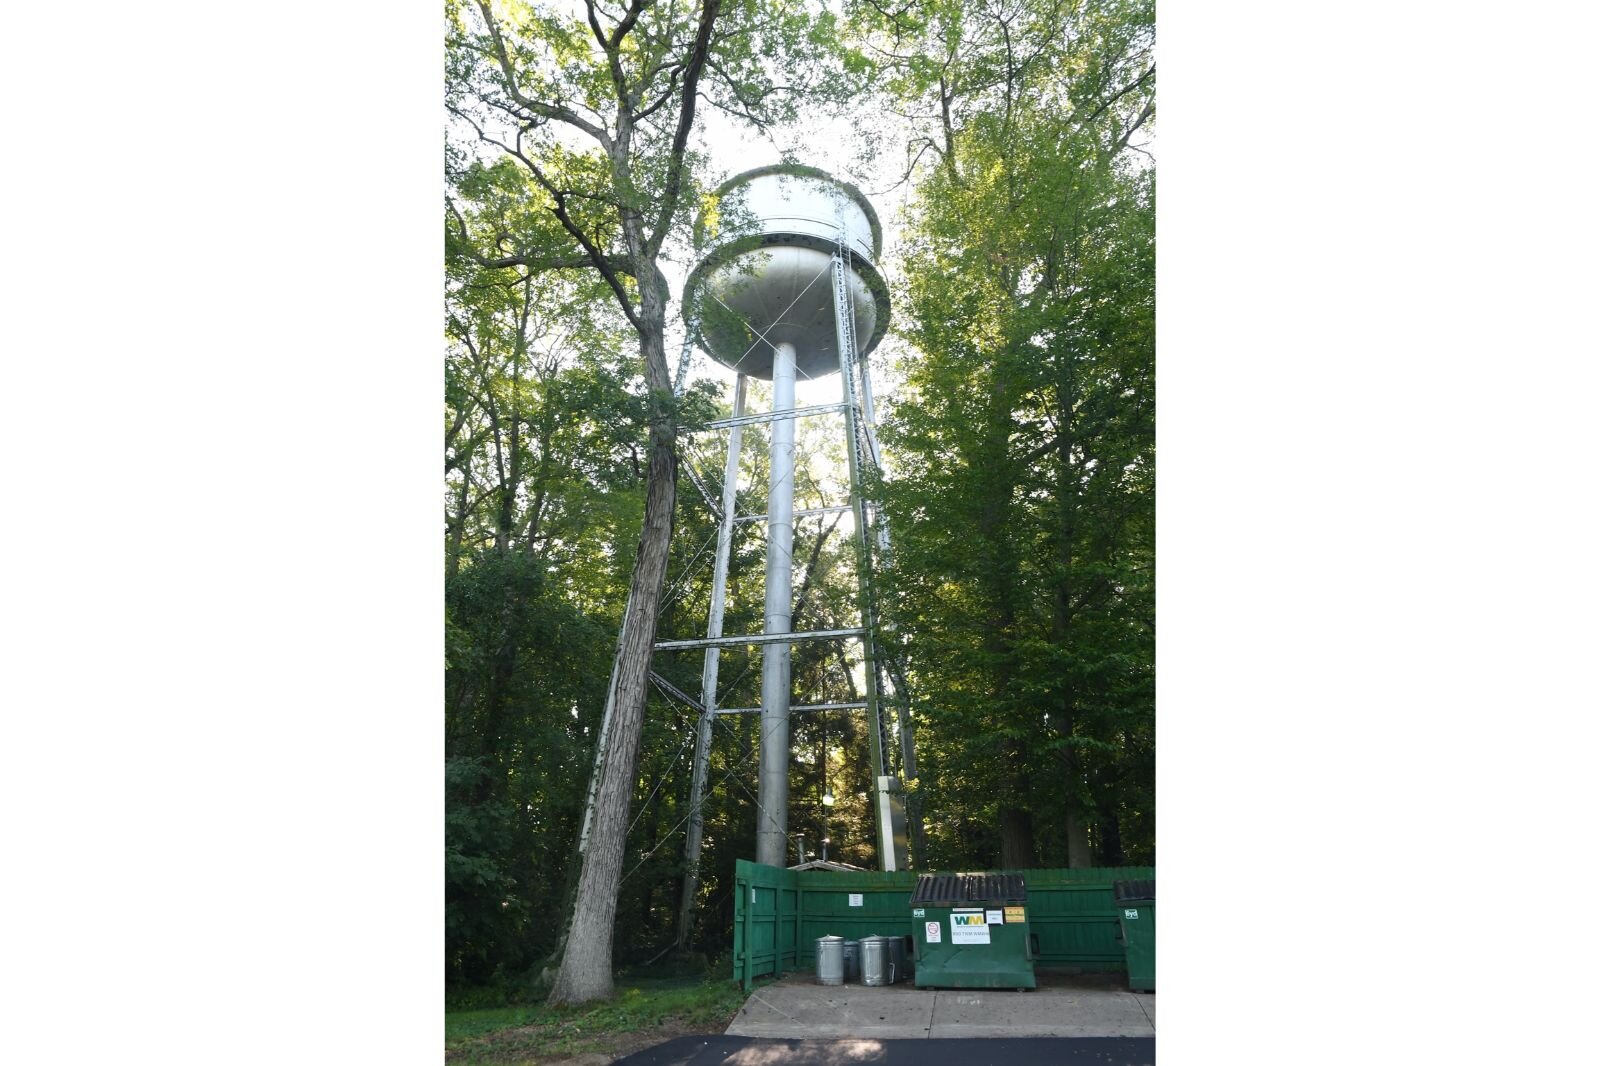 The water tower at Clear Lake Camp has enough water for use in fire supression, if needed.